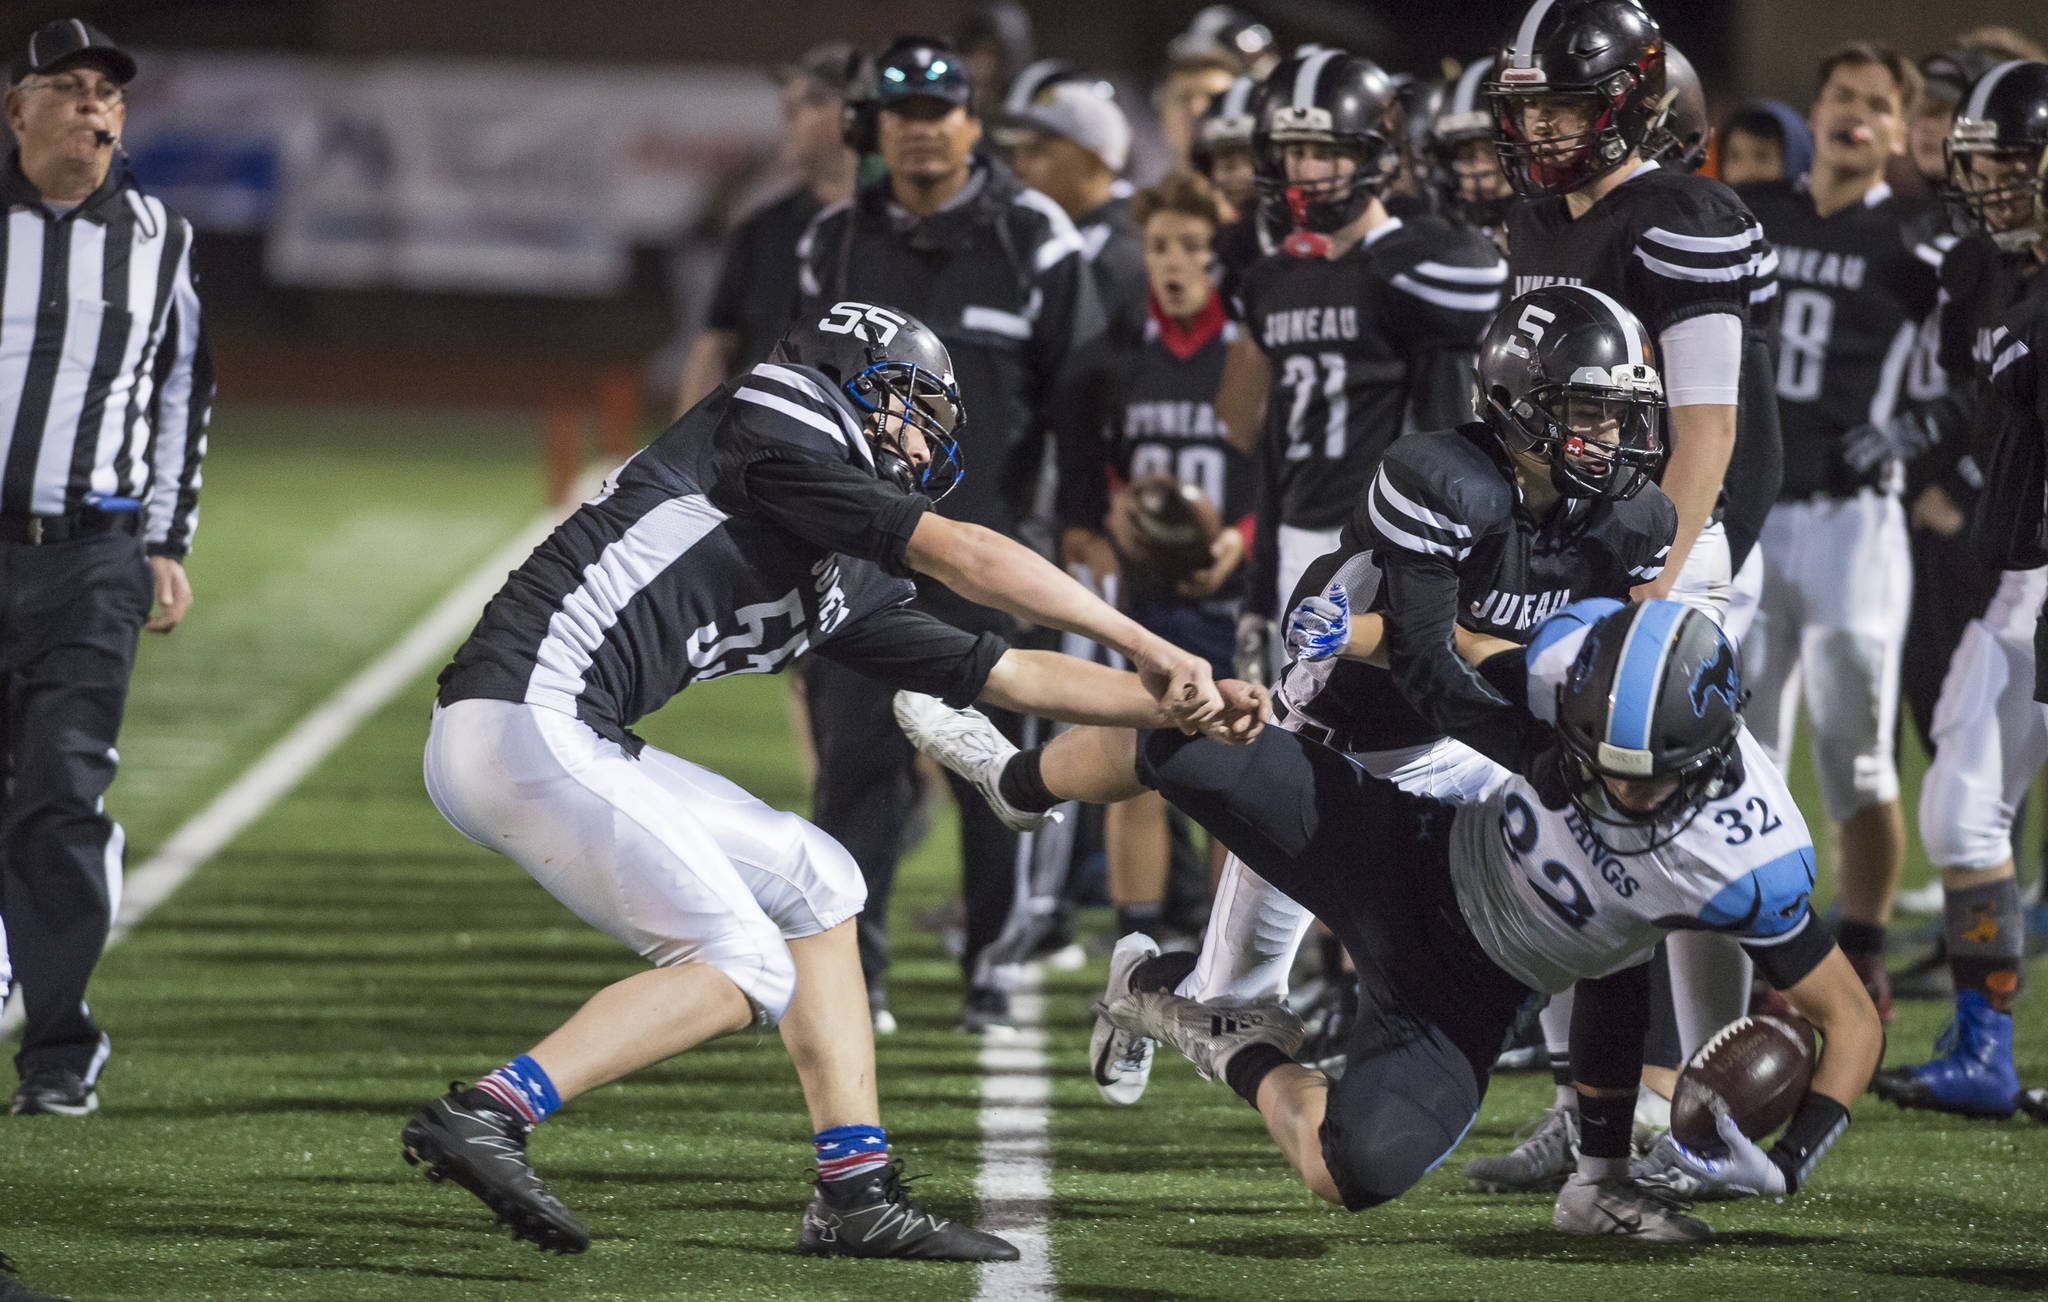 Juneau United’s Gaven Smith, left, and Hansel Hinckle push Chugiak’s Christian Beesing out of play at Adair-Kennedy Memorial Field on Friday, Sept. 14, 2018. A penalty was called on the play. Chugiak won 22-7. (Michael Penn | Juneau Empire)